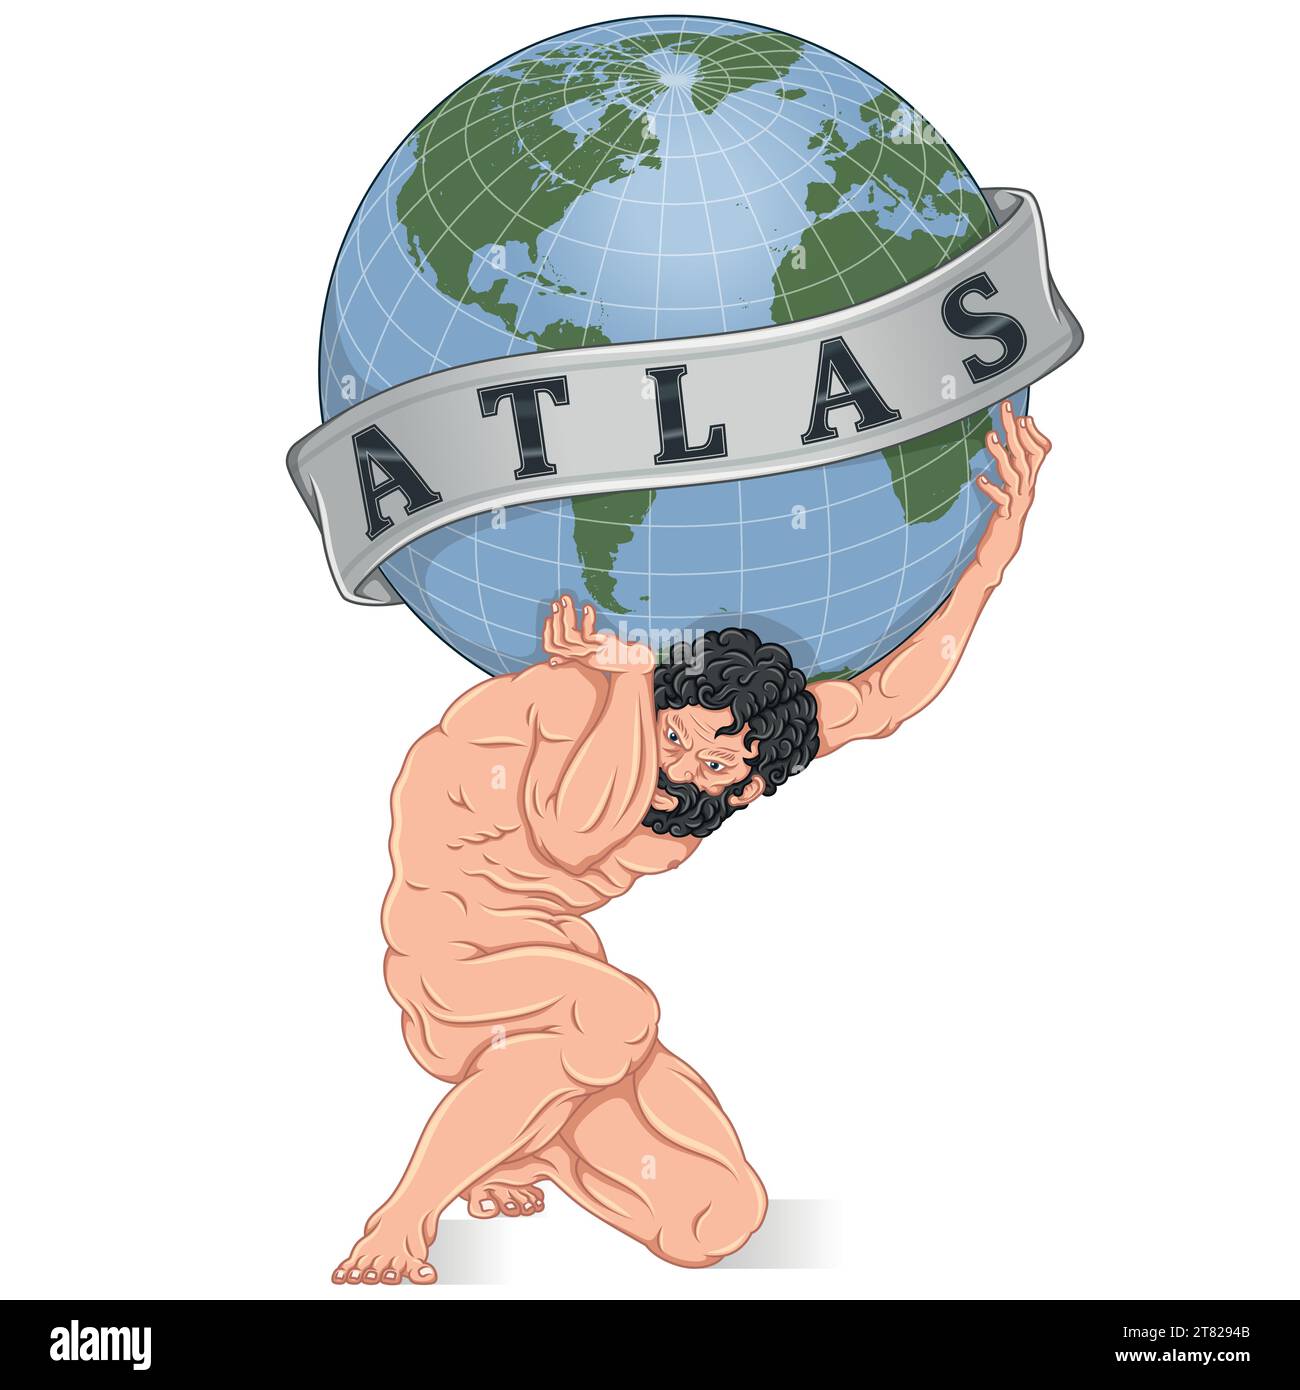 Vector design of Titan Atlas holding the planet Earth, Greek mythology titan holding the Earth sphere, surrounded with ribbon Stock Vector